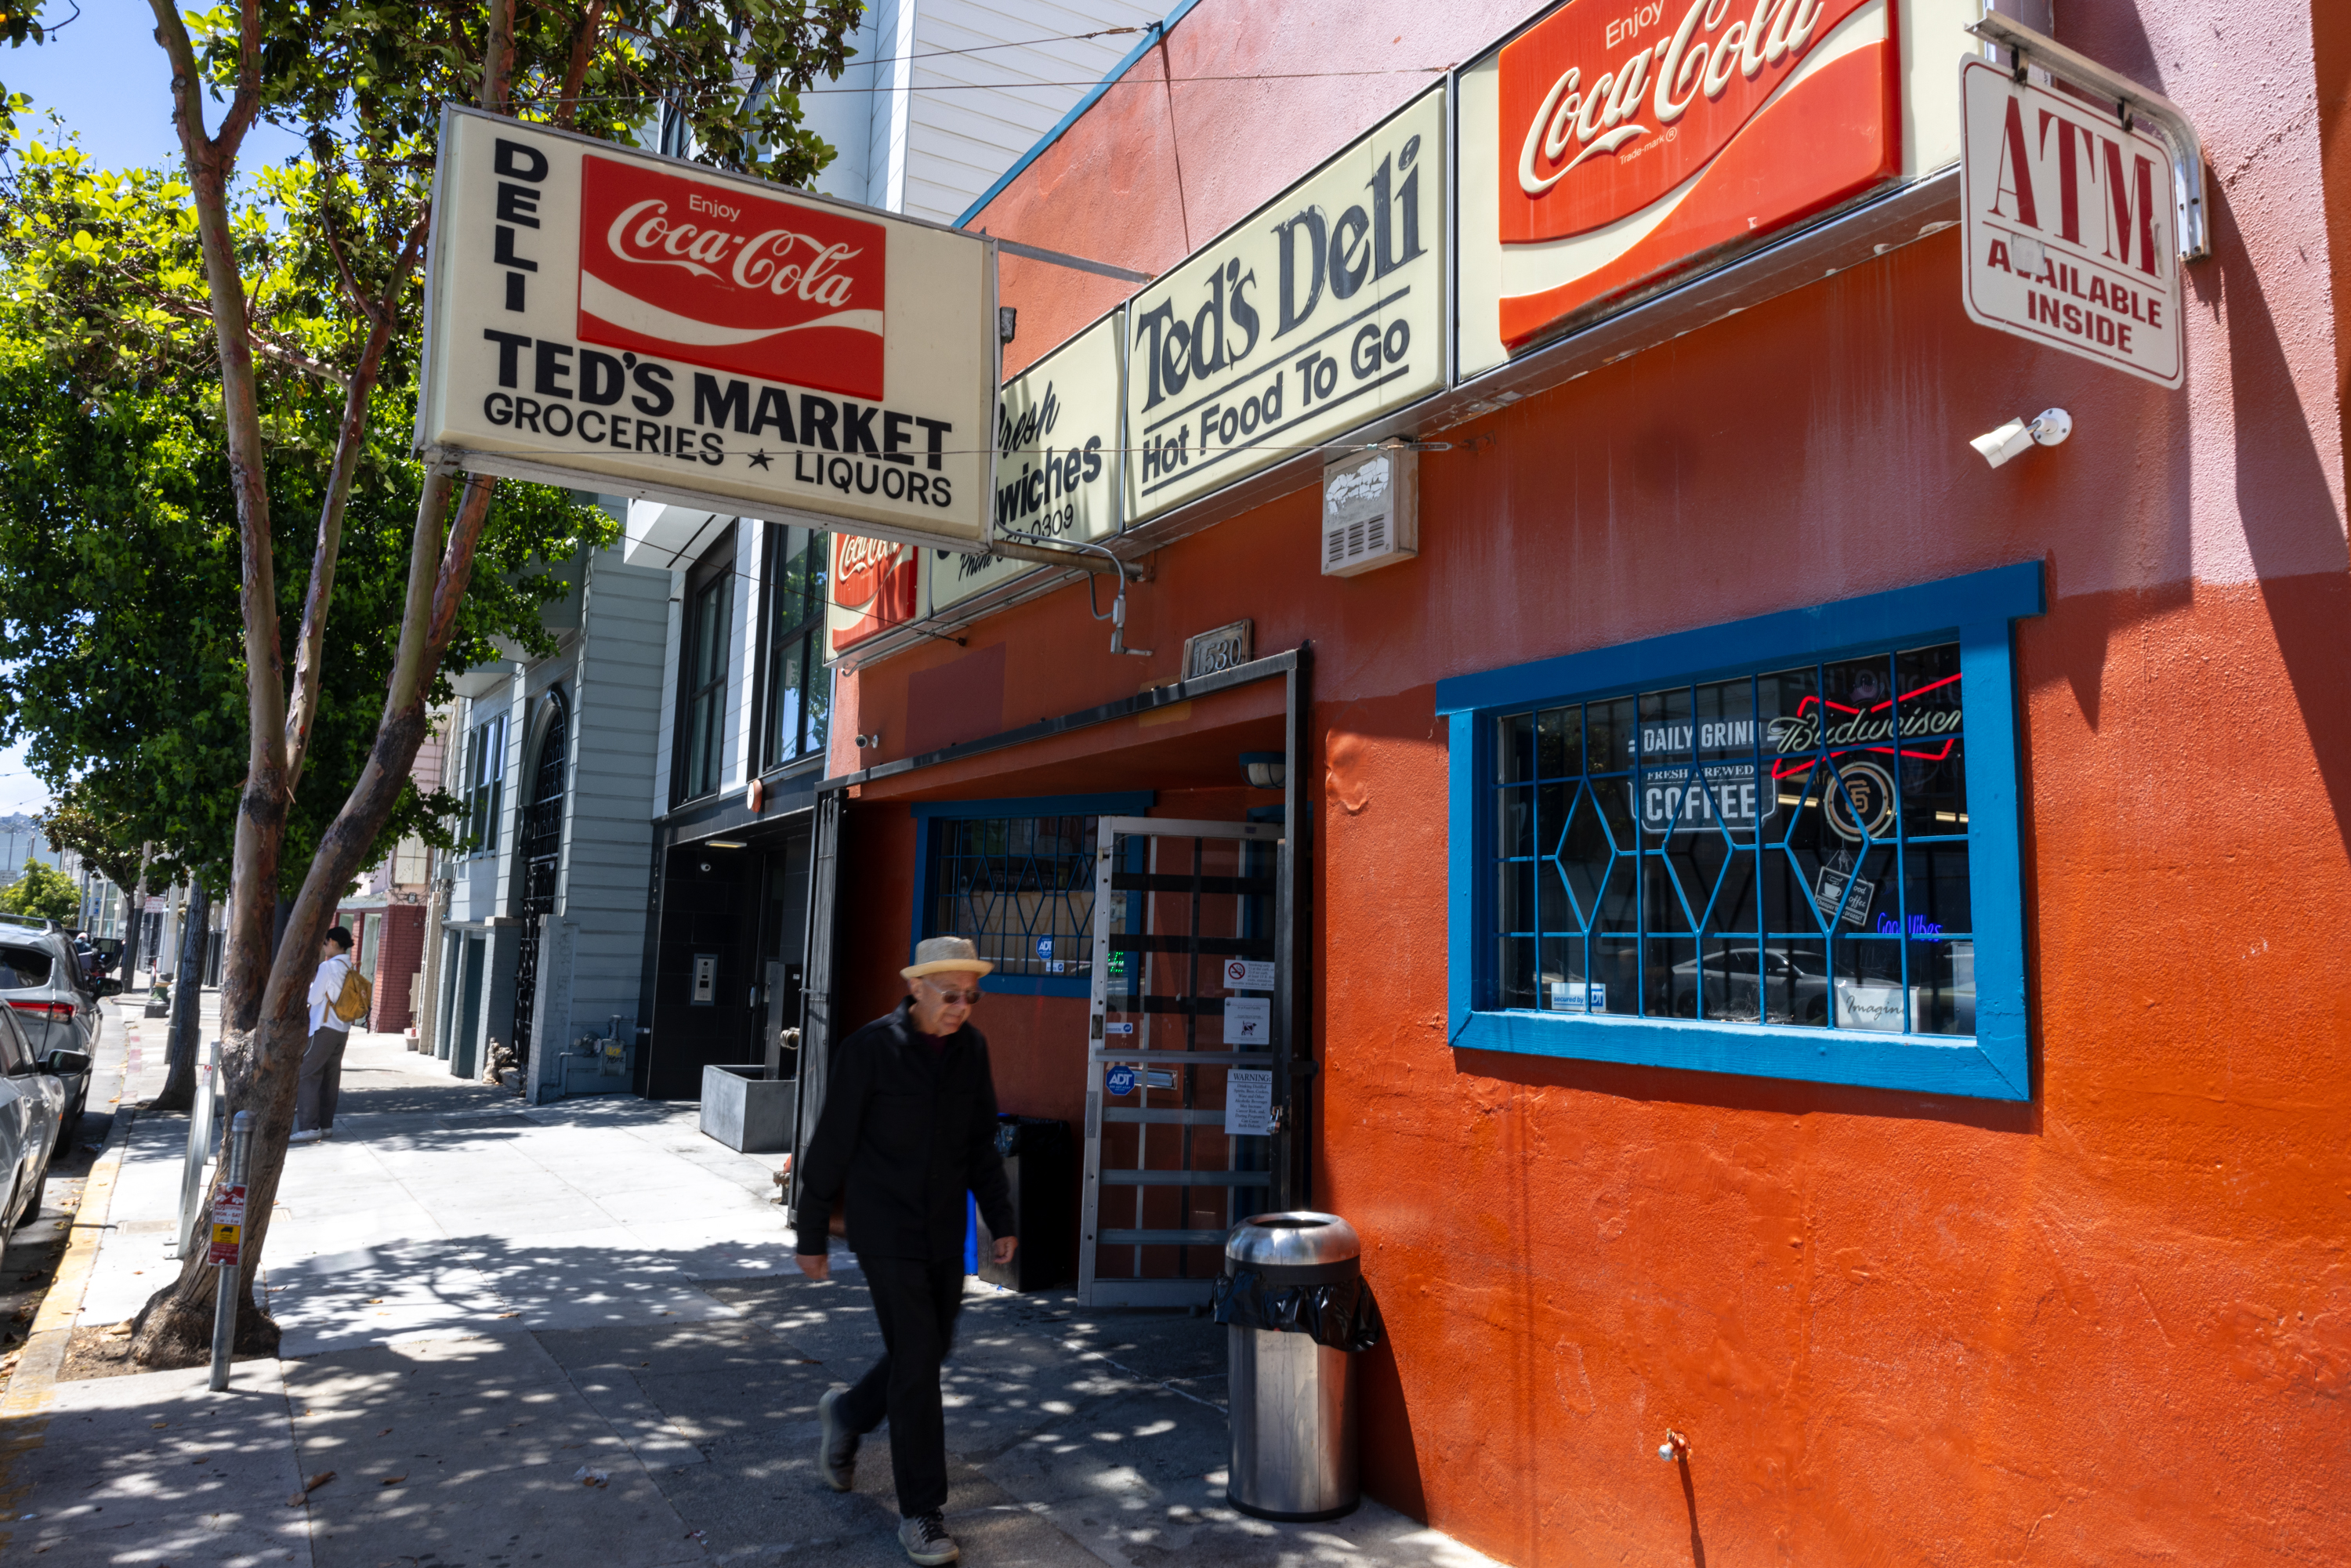 San Francisco Family-Run Delis Face Existential Crisis, Owners Say